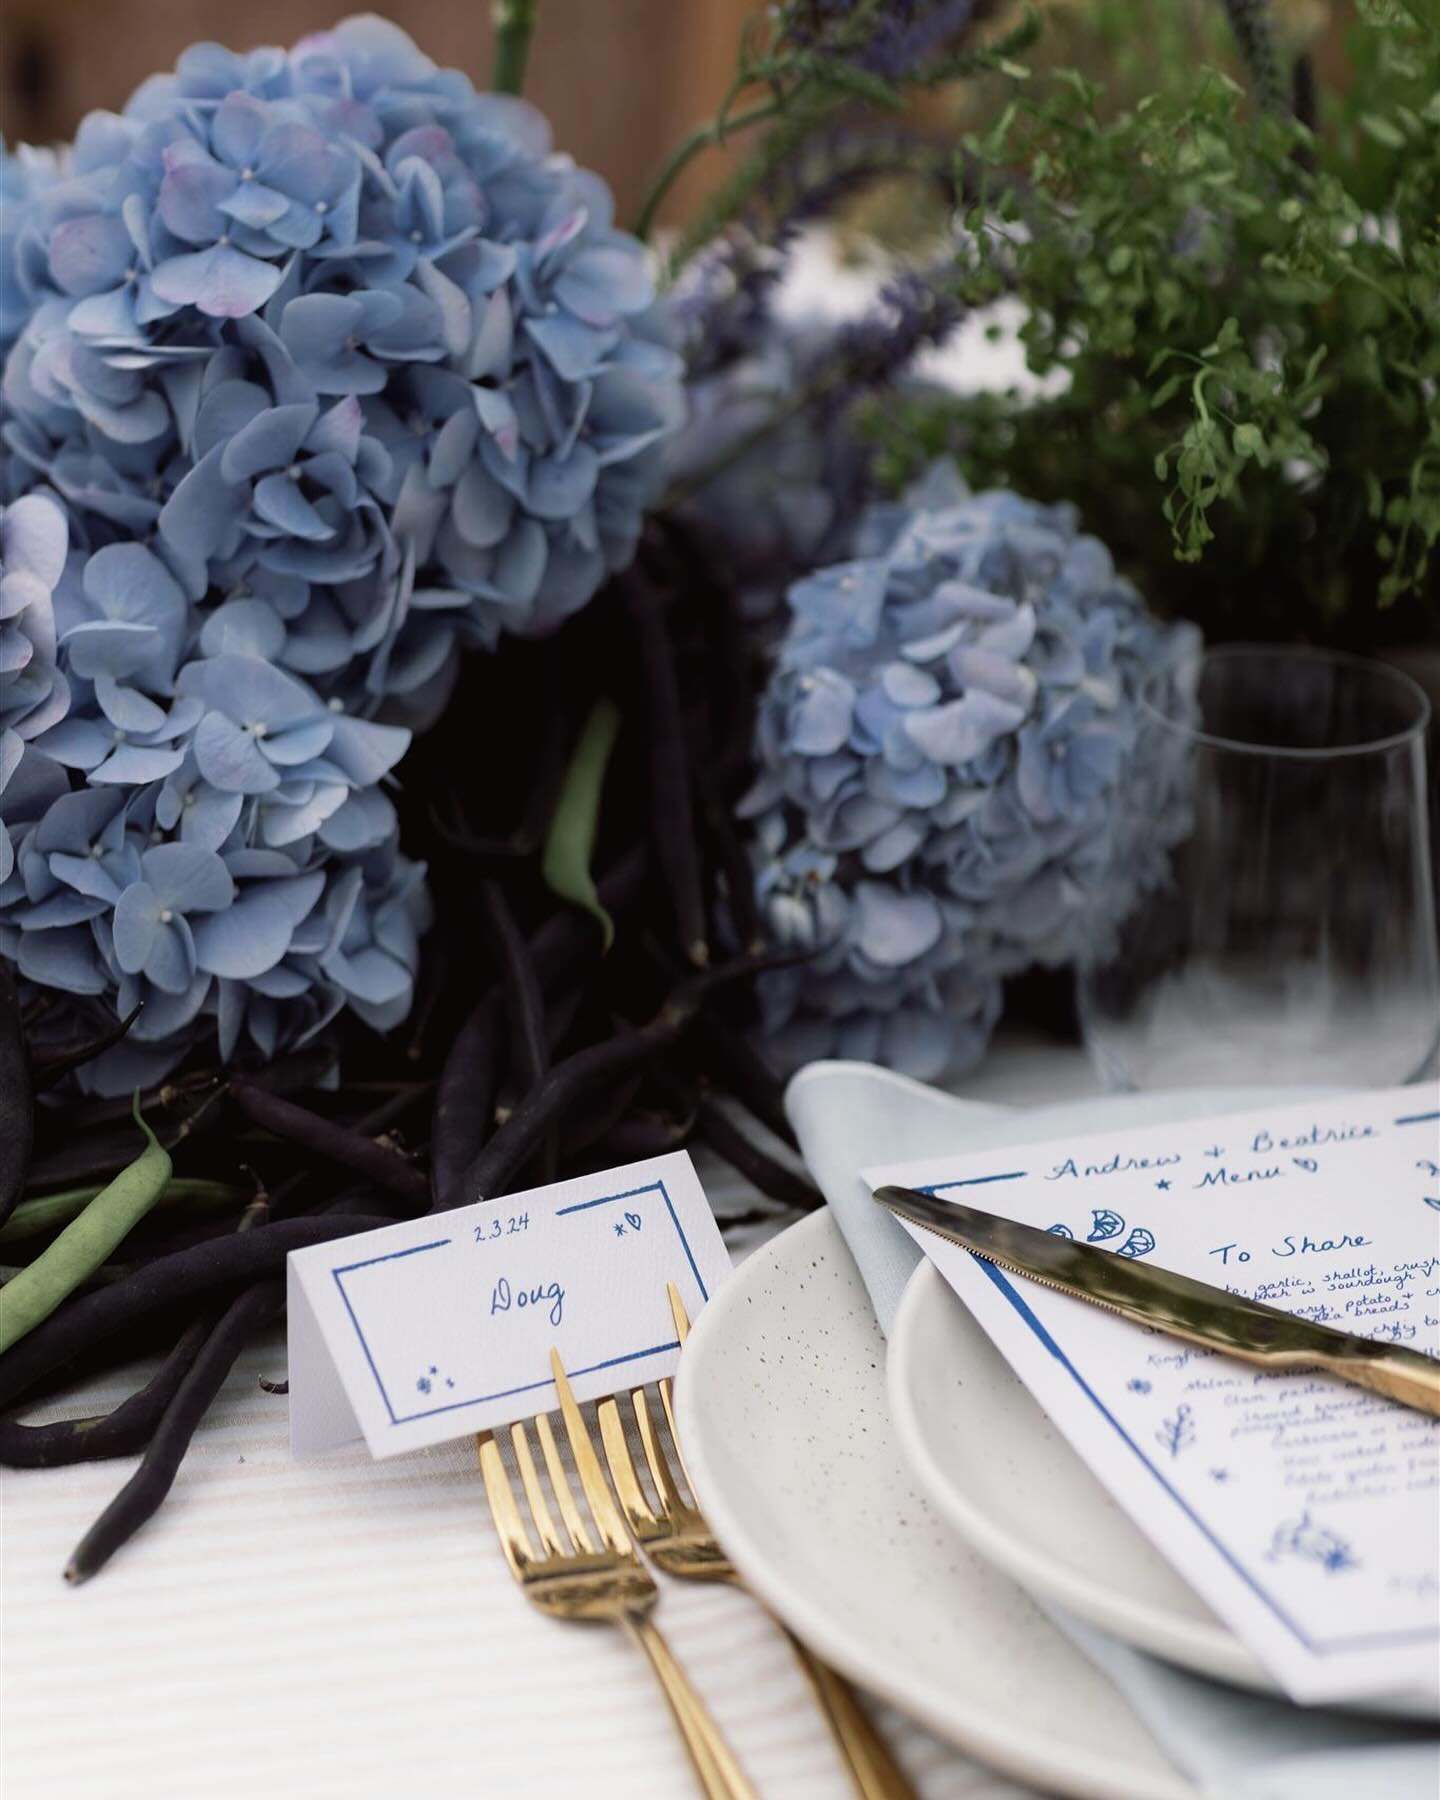 It&rsquo;s all in the details 🥰

&bull;
&bull;
&bull;

#wildflower #styling #flowerstyling #tablestyling #blooms #longlunch #weddingstationery #waihekeisland #weddinginspiration #flowers #eventstyling #wedding #weddingseason #weddingflowers #wedding